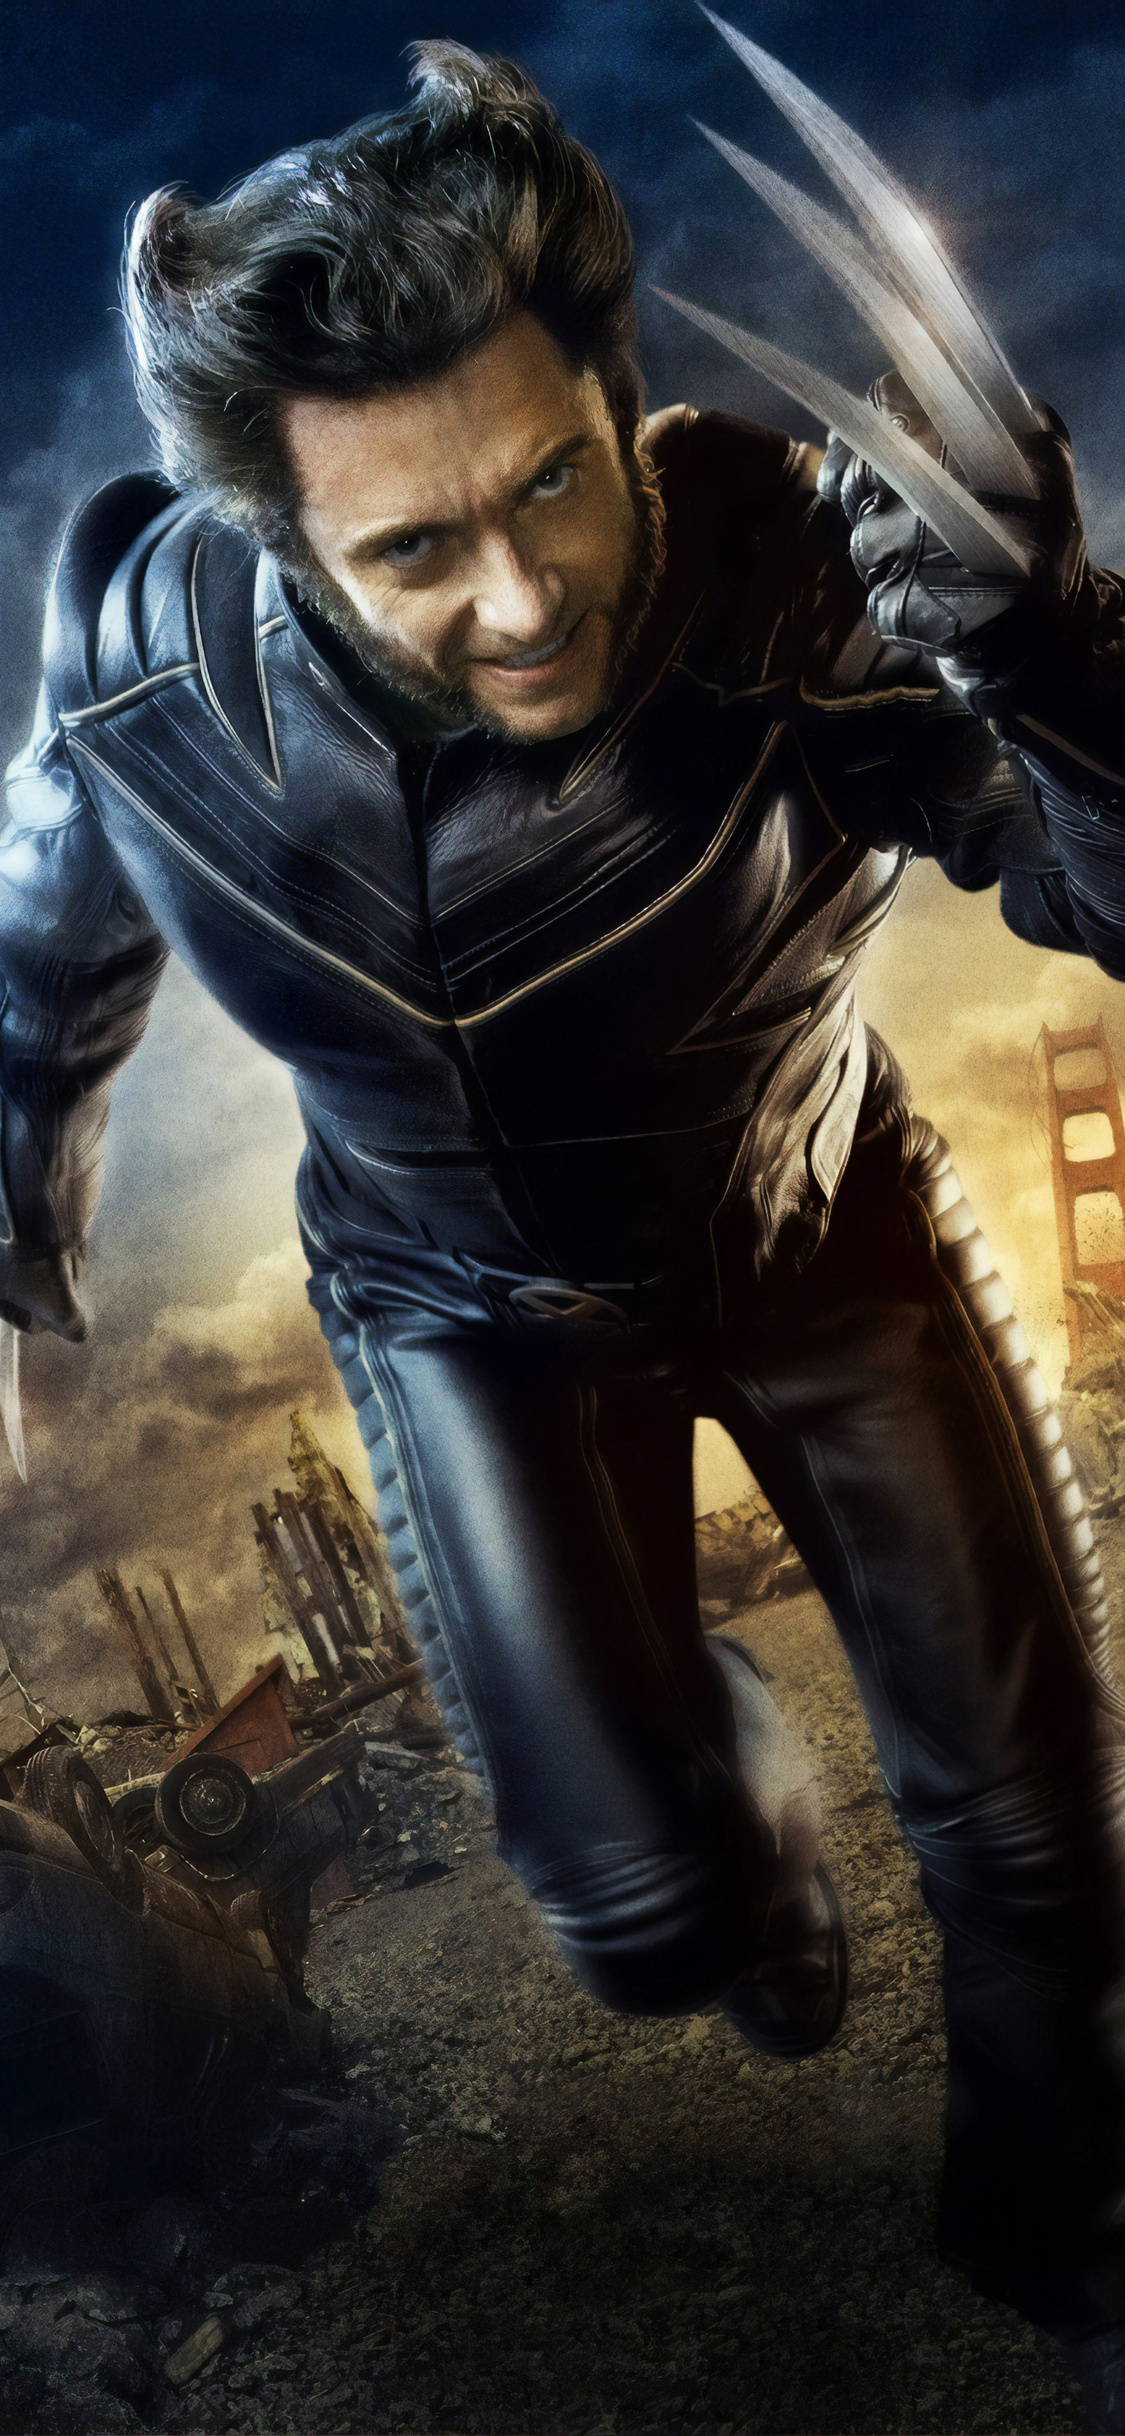 X-Men: The Last Stand, Wolverine on iPhone, High-definition wallpapers, Superhero in action, 1130x2440 HD Handy